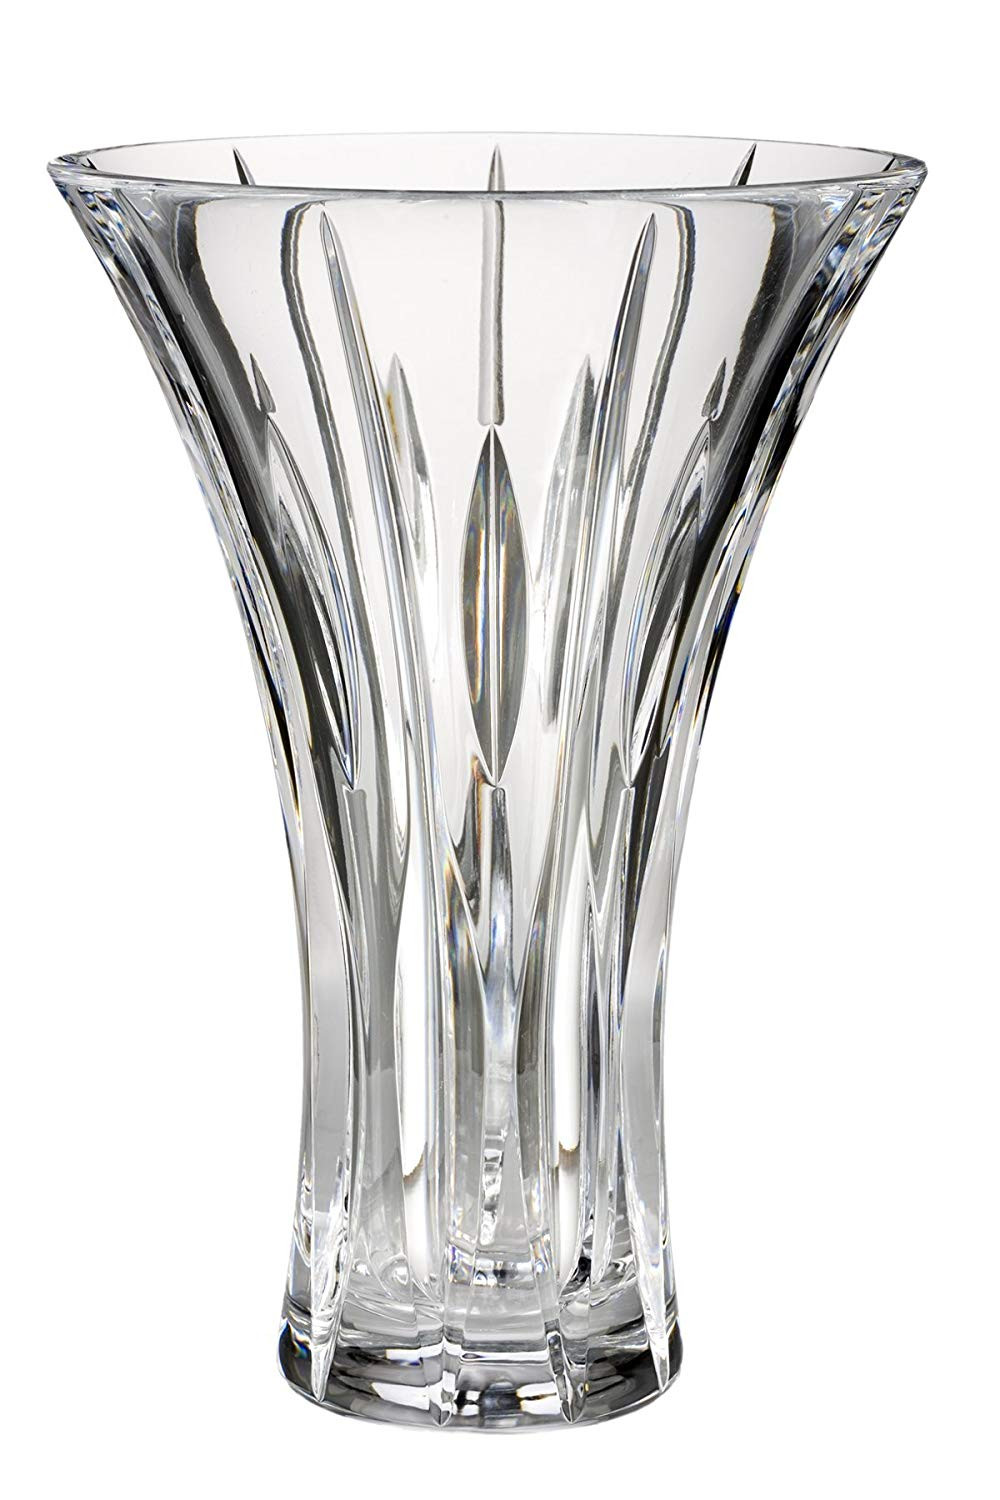 11 Lovable Marquis by Waterford Sheridan Flared 11 Crystal Vase 2024 free download marquis by waterford sheridan flared 11 crystal vase of amazon com marquis by waterford sheridan flared 11 inch vase home intended for amazon com marquis by waterford sheridan flared 11 inch